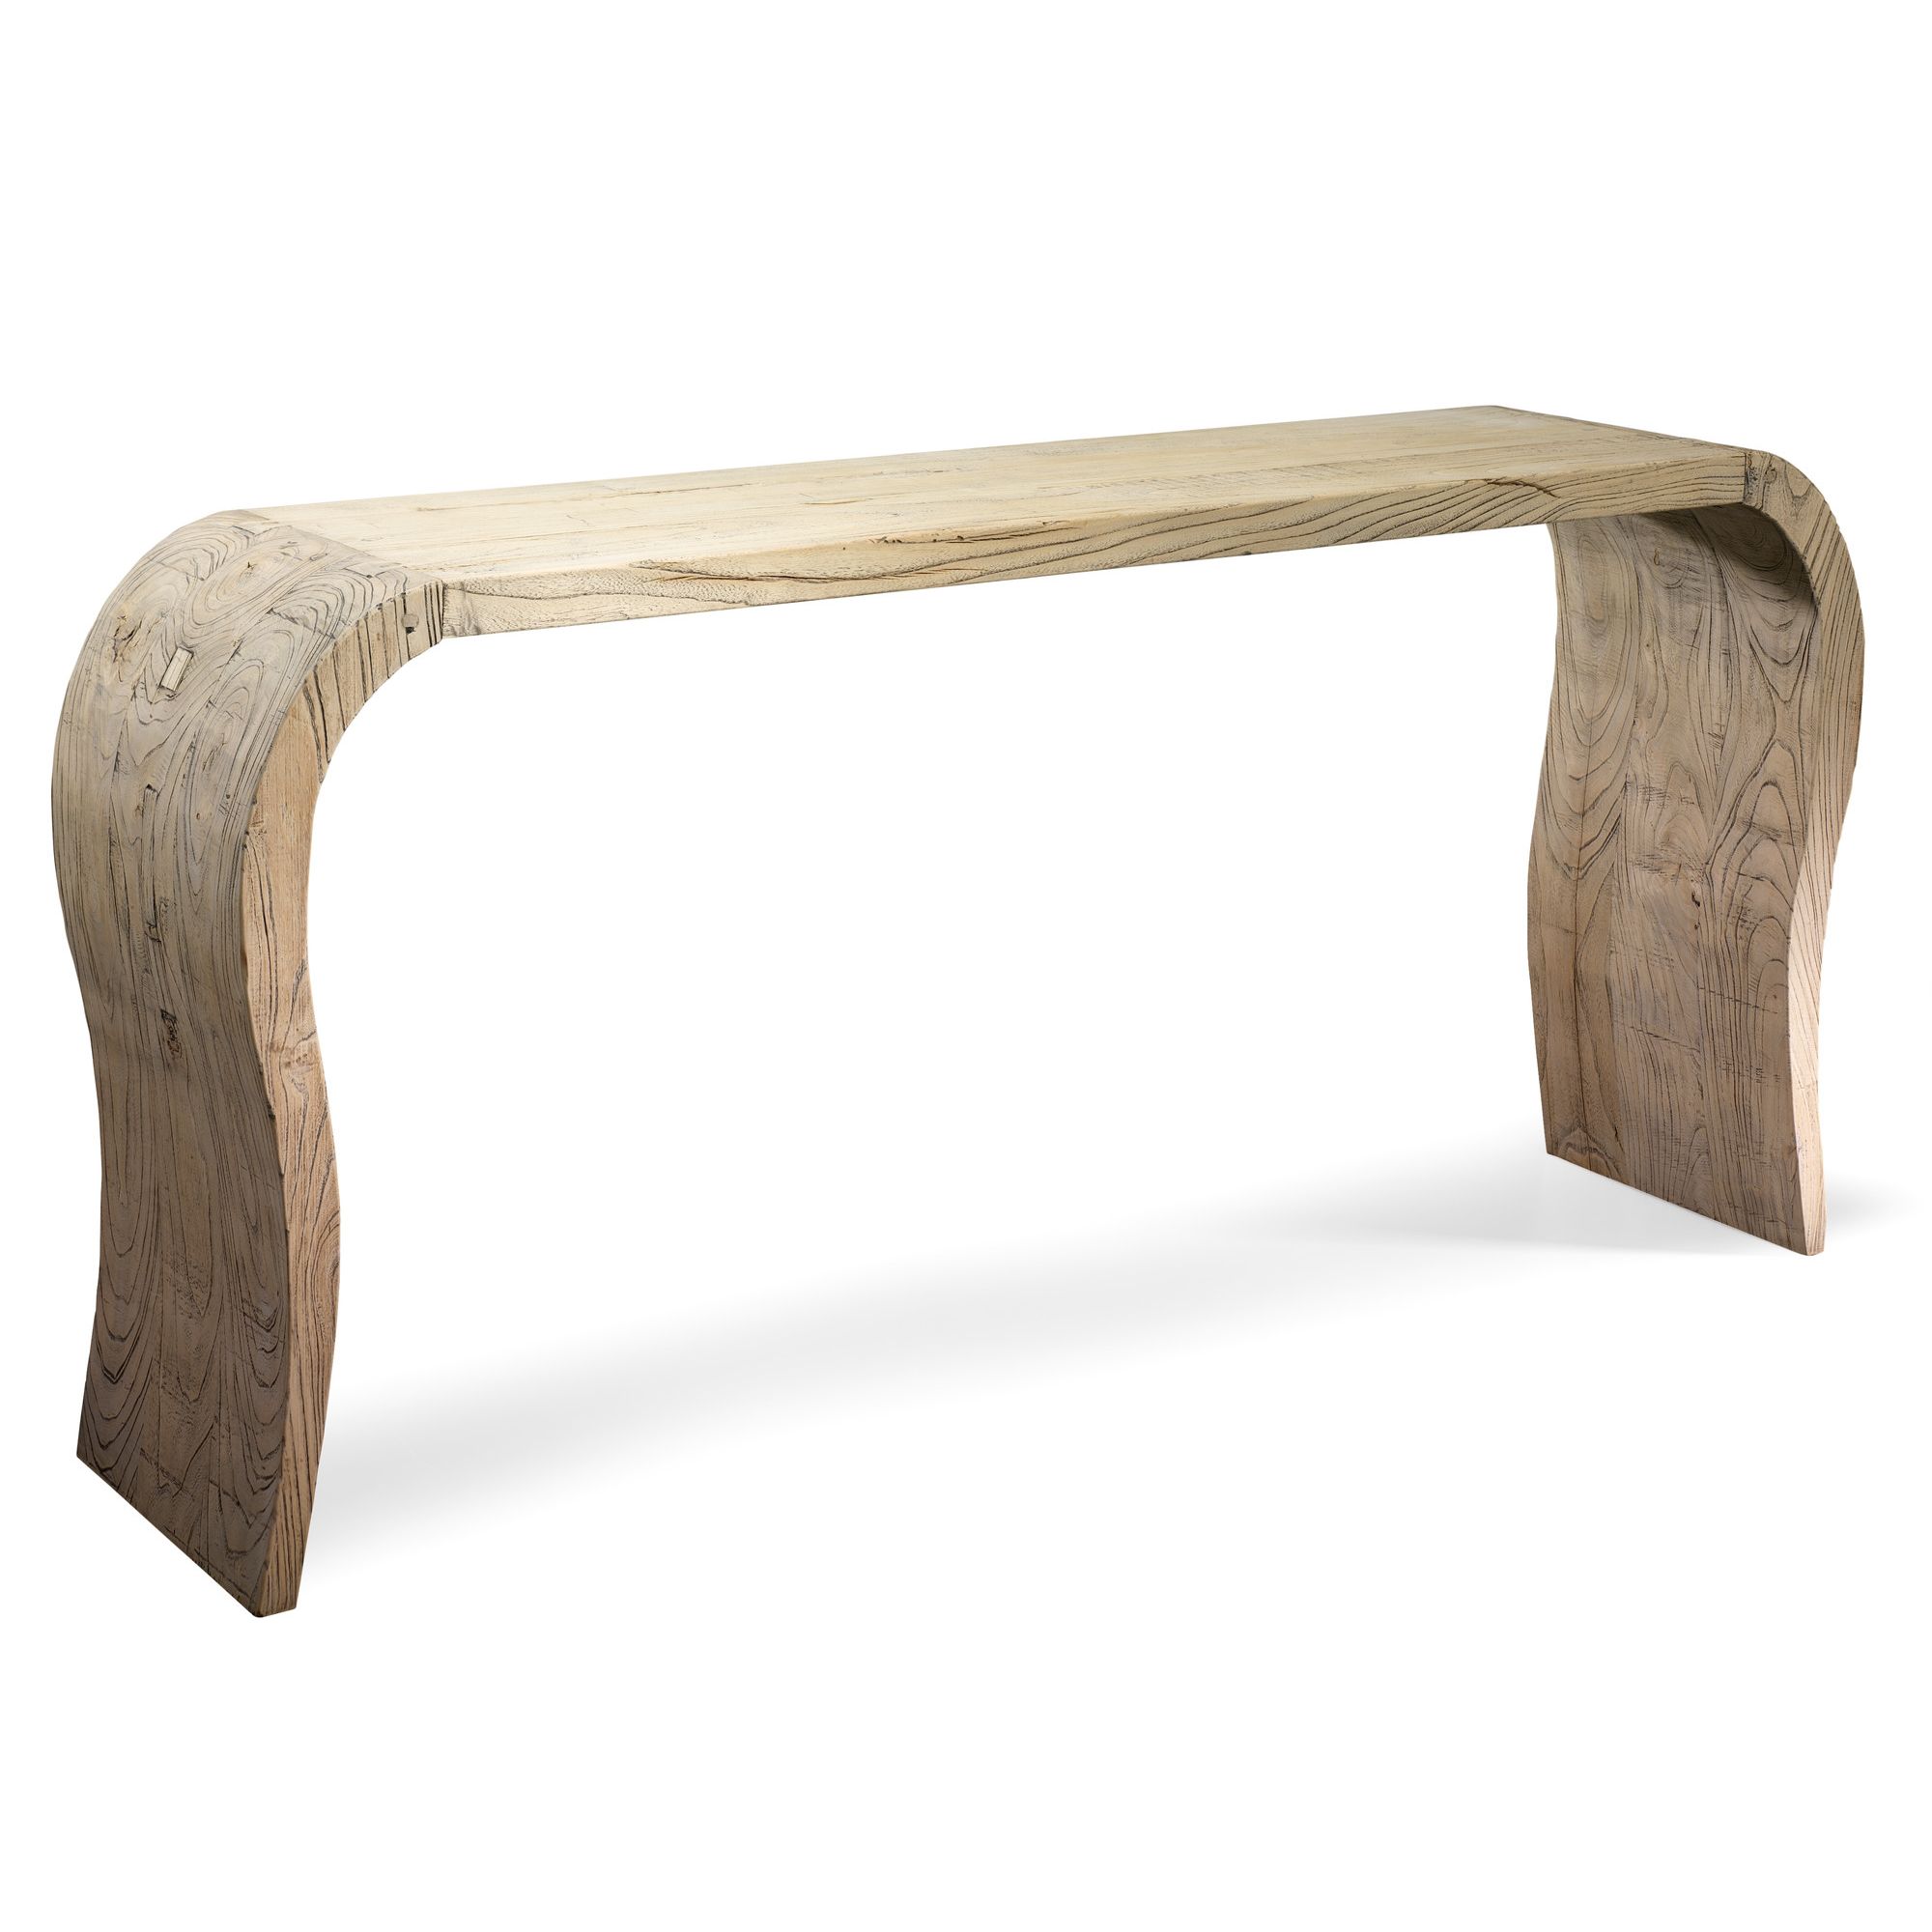 Shimu Chinese Country Furniture Curved Console Table at Tesco Direct